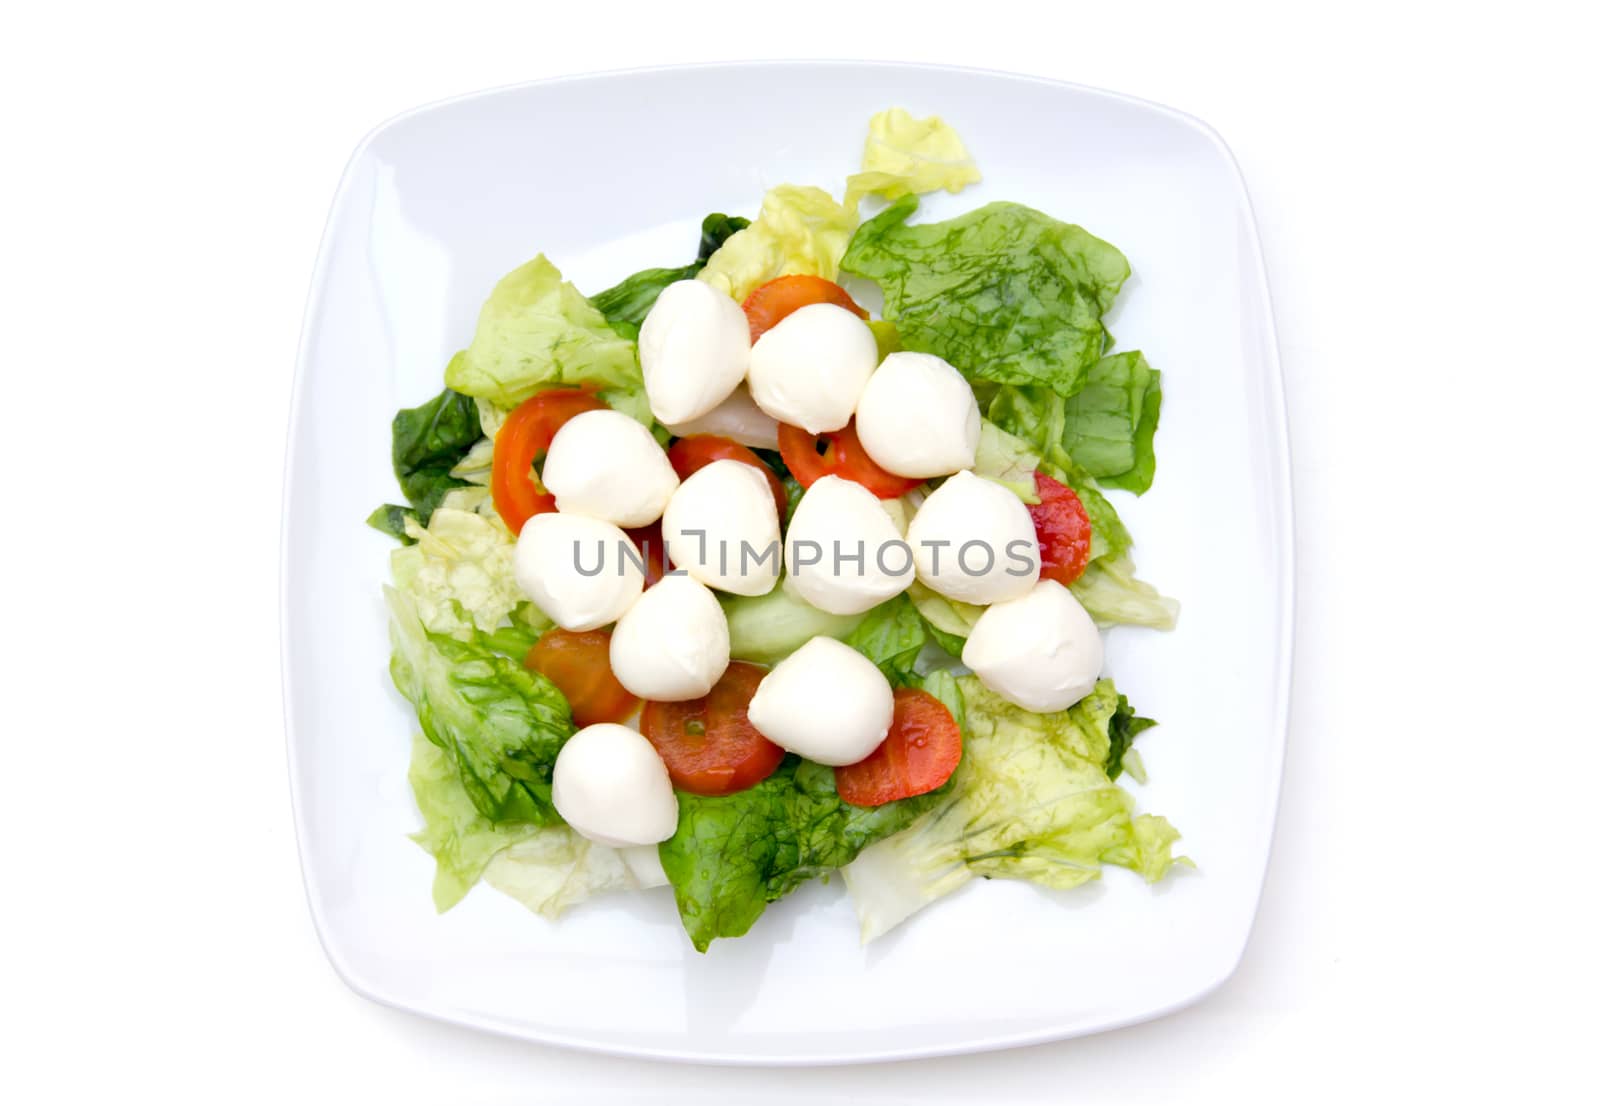 Salad with tomatoes and mozzarella top by spafra